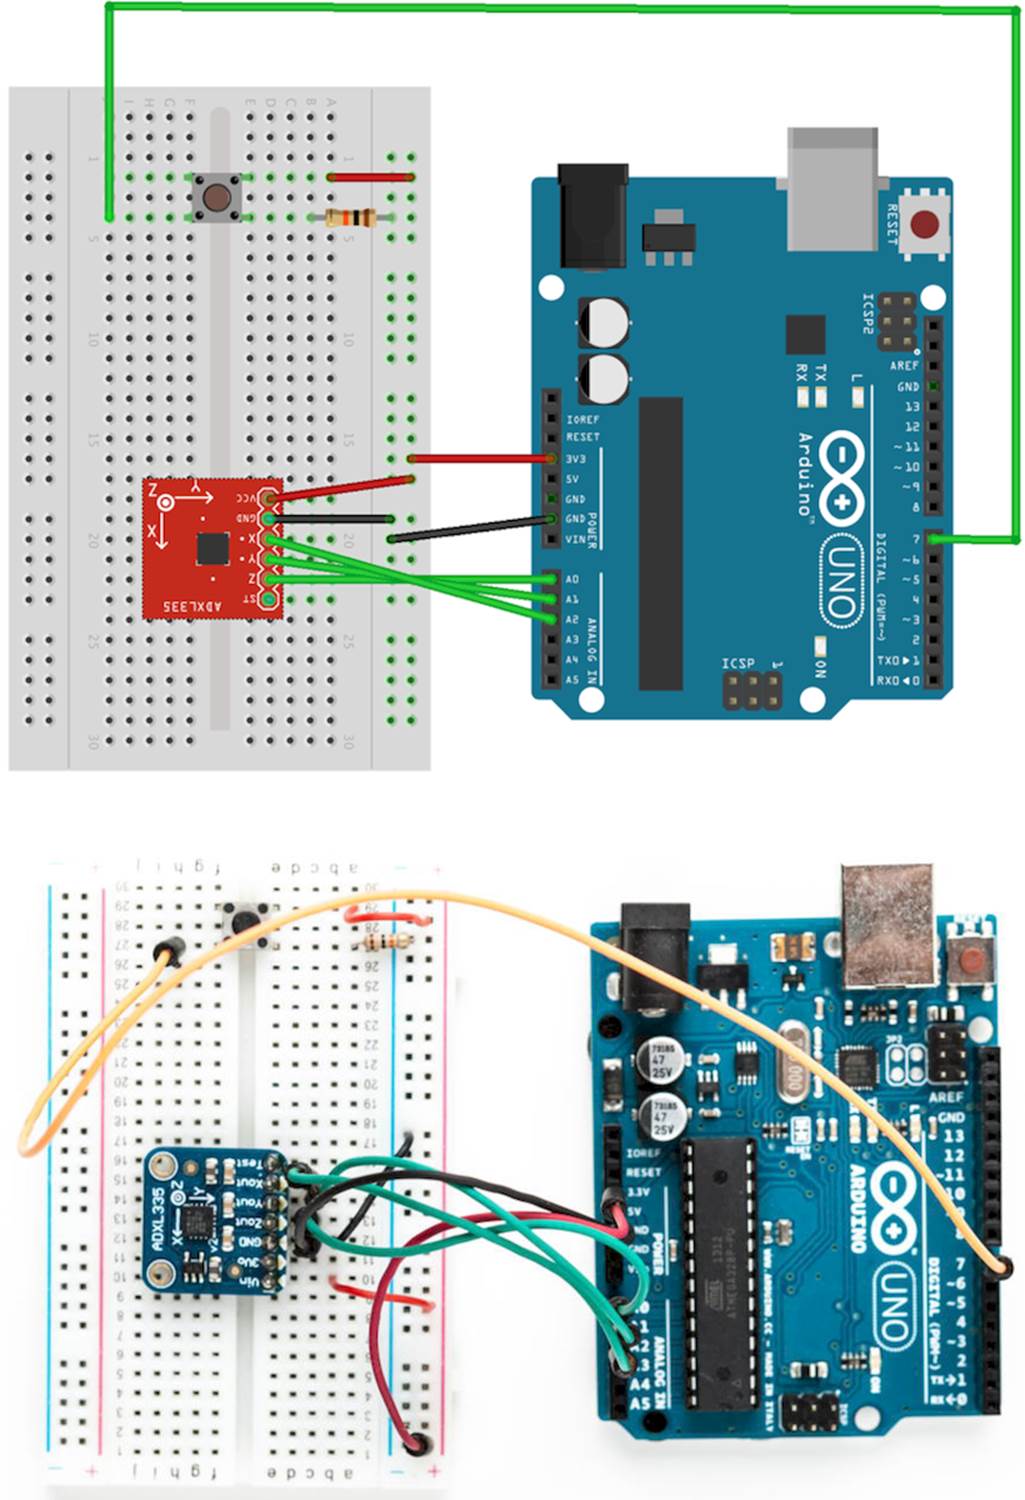 images/game_controller_schematic_and_breadboard